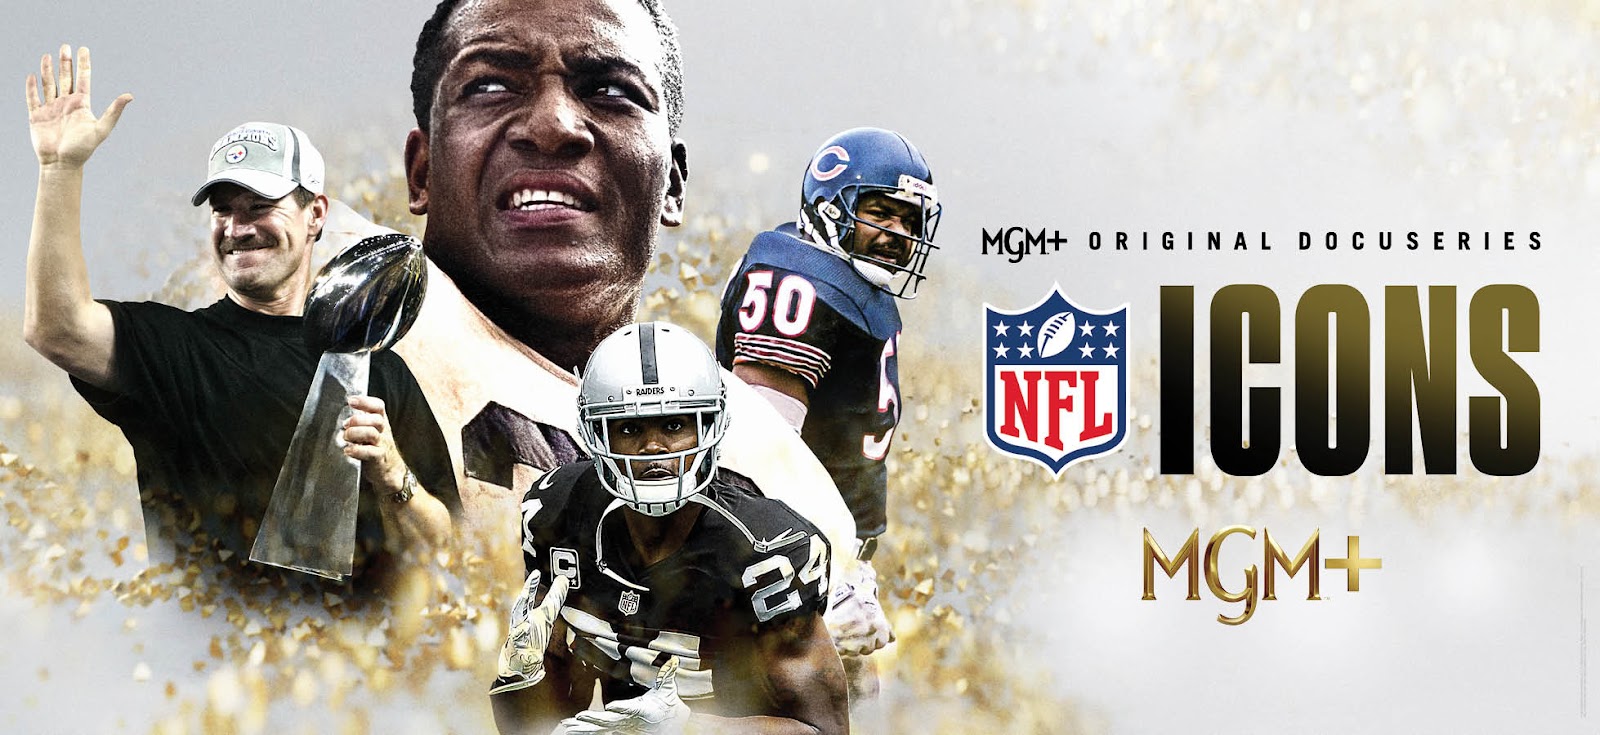 NFL Legends Take Center Stage In Prime Video’s NFL Icons Docuseries